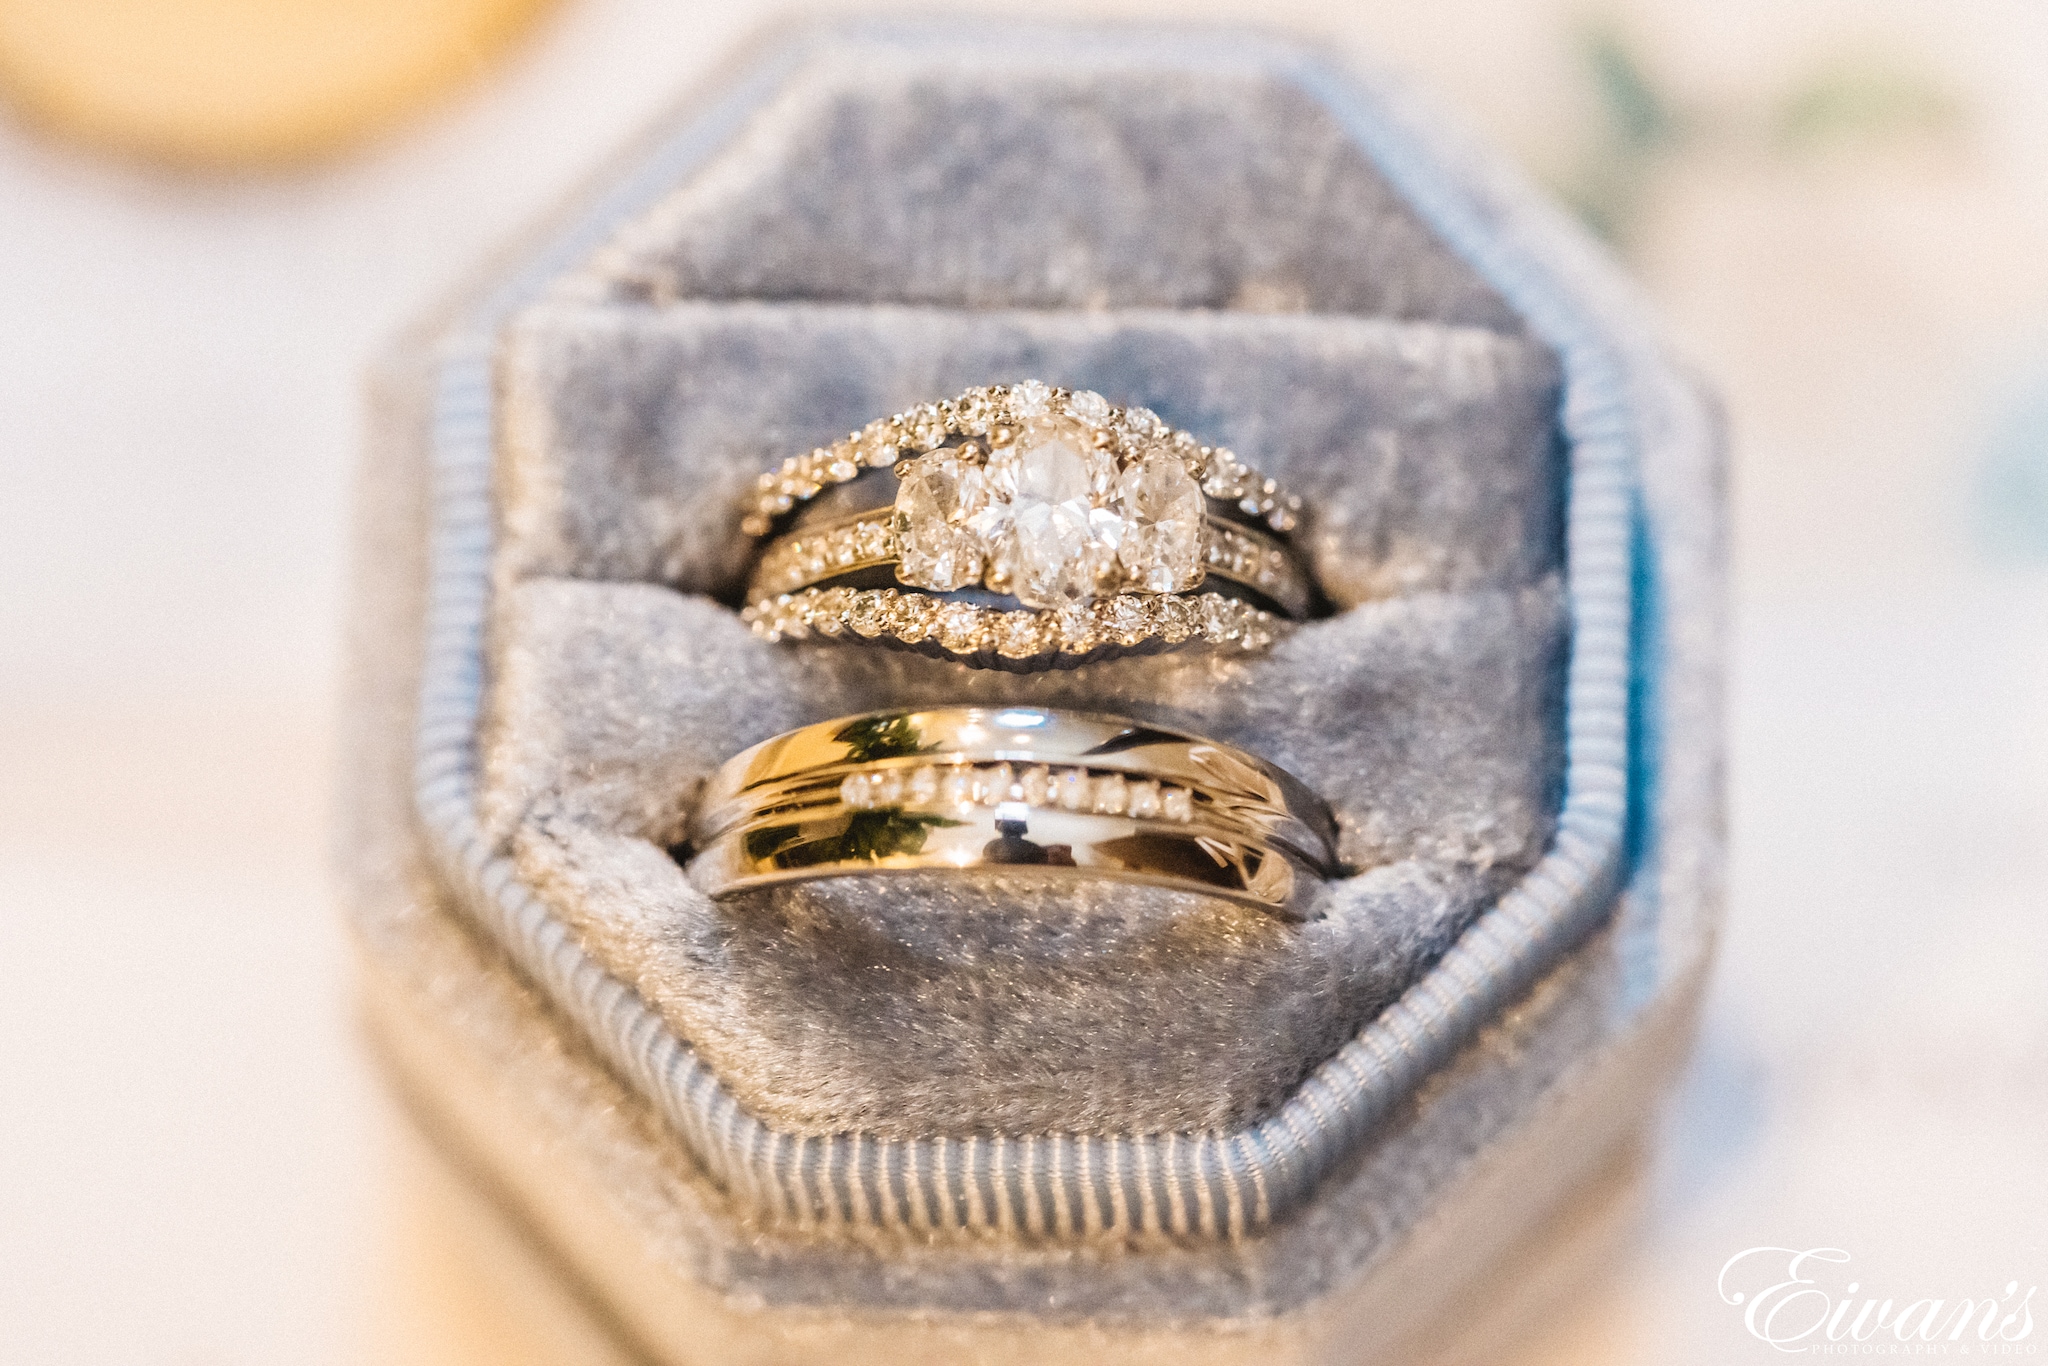 Engagement Ring vs. Wedding Ring: What They Each Symbolize